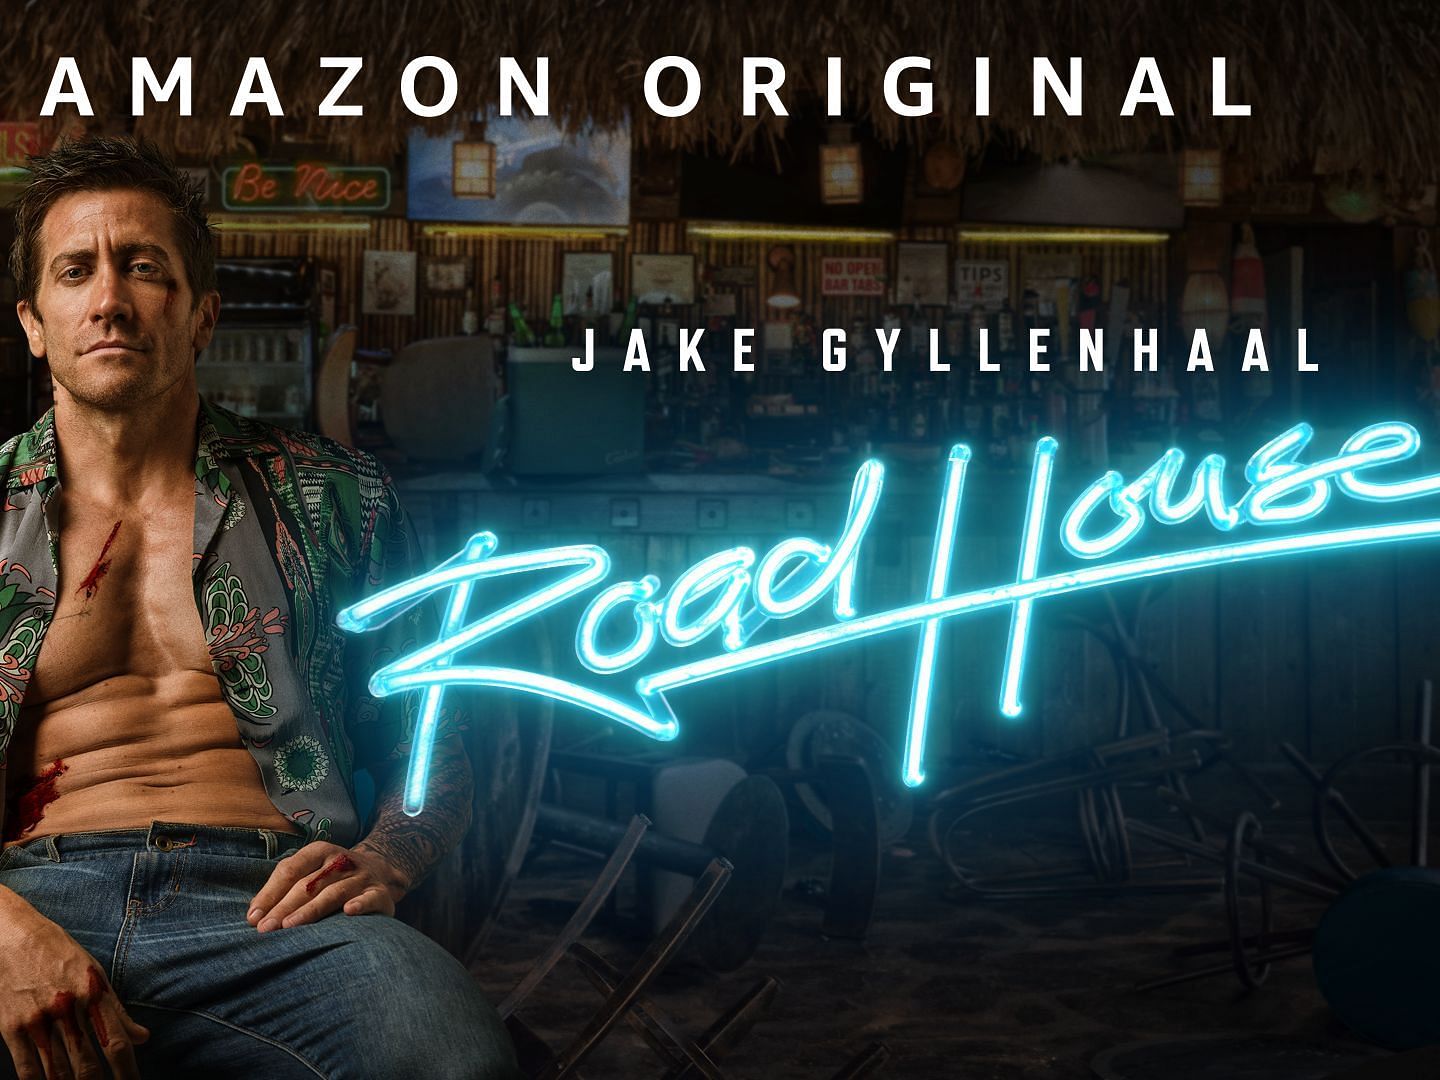 A poster of Road House (image via Prime Video)